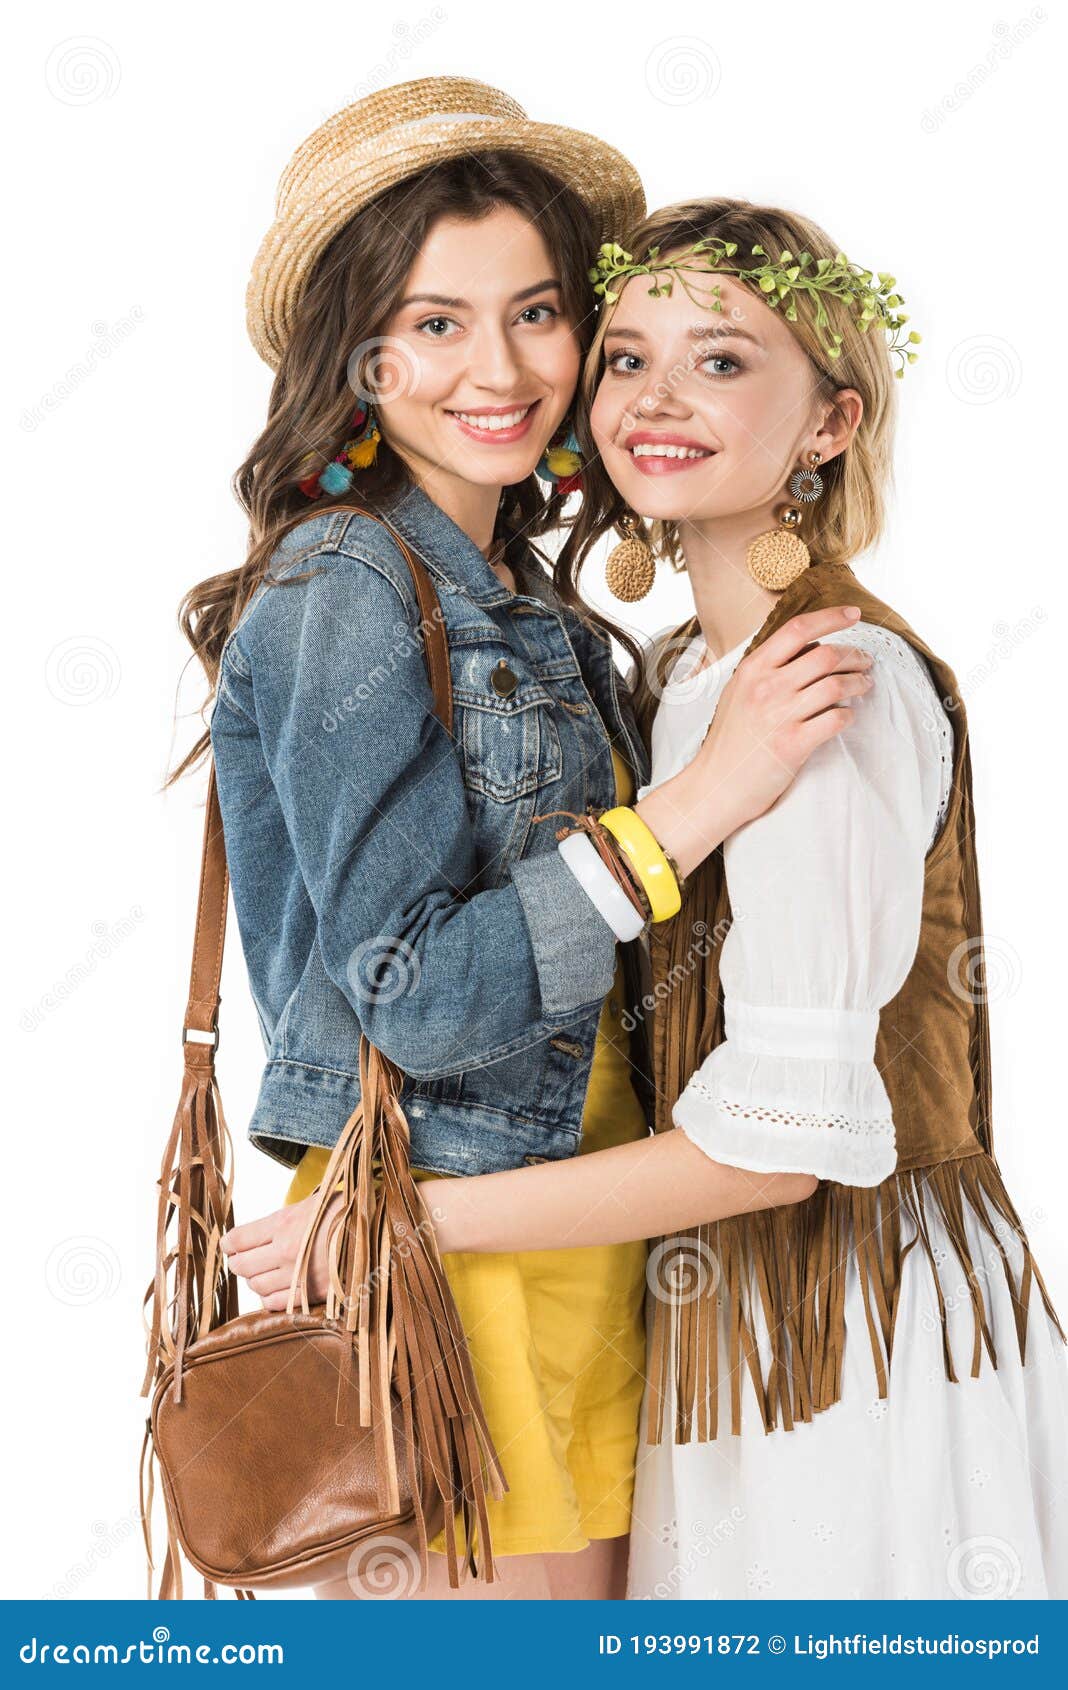 bisexual hippie girls embracing  on white